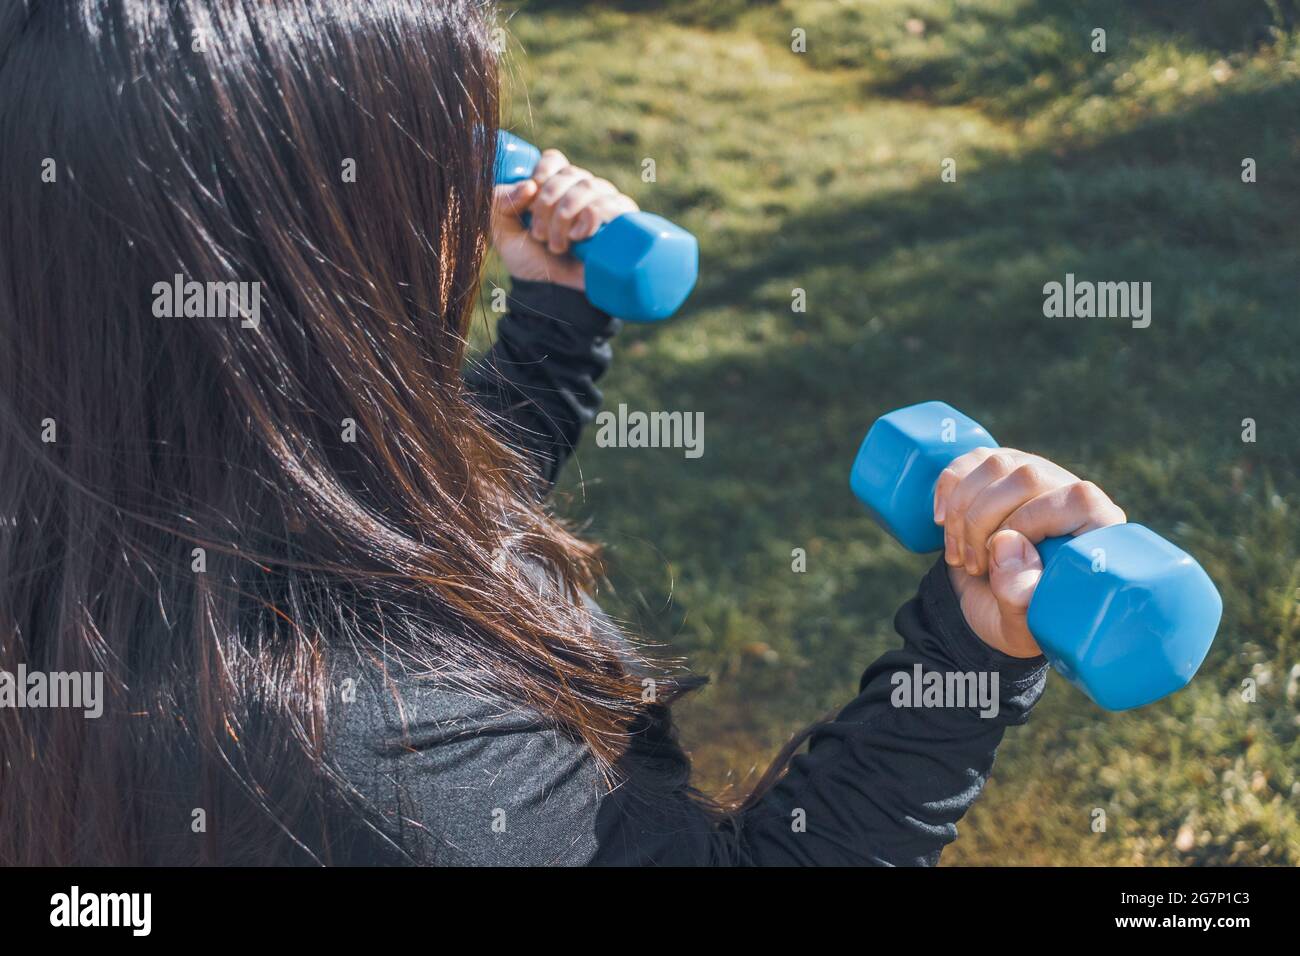 Plus size woman holding two blue dumbells. Healthy life. Fitness concept Stock Photo